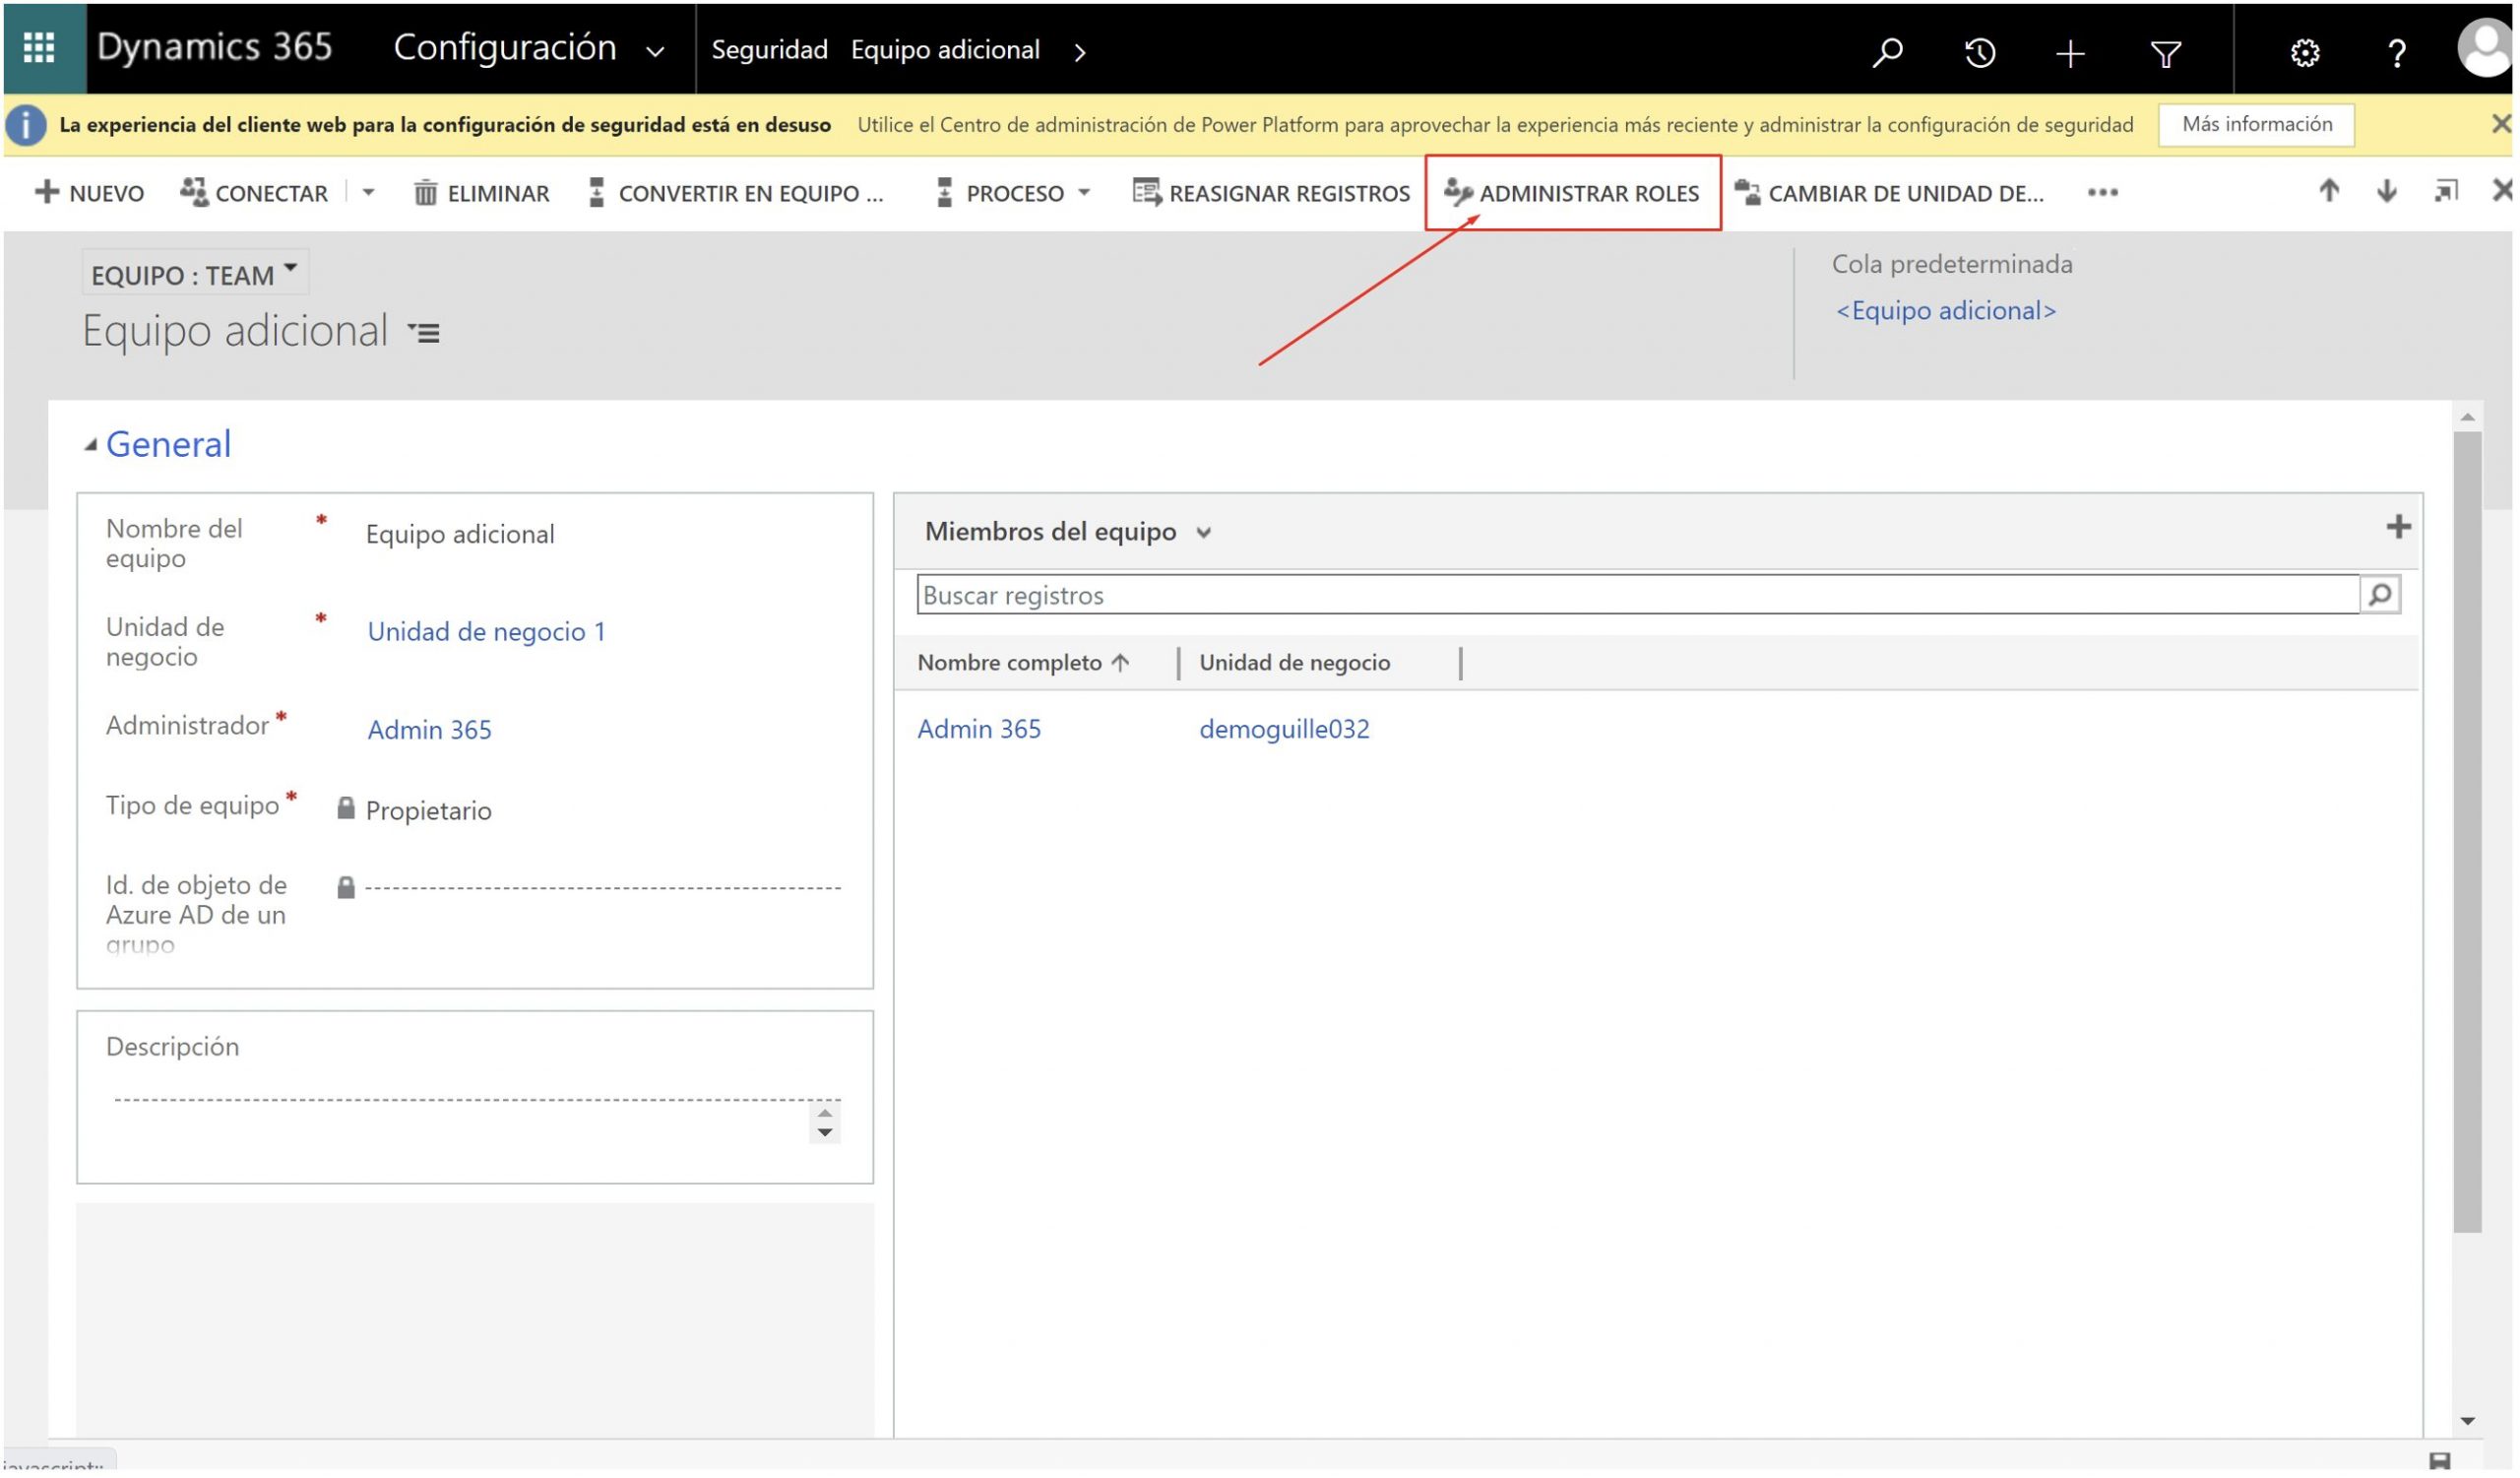 Assigning mass security roles to users in D365 CE Axazure